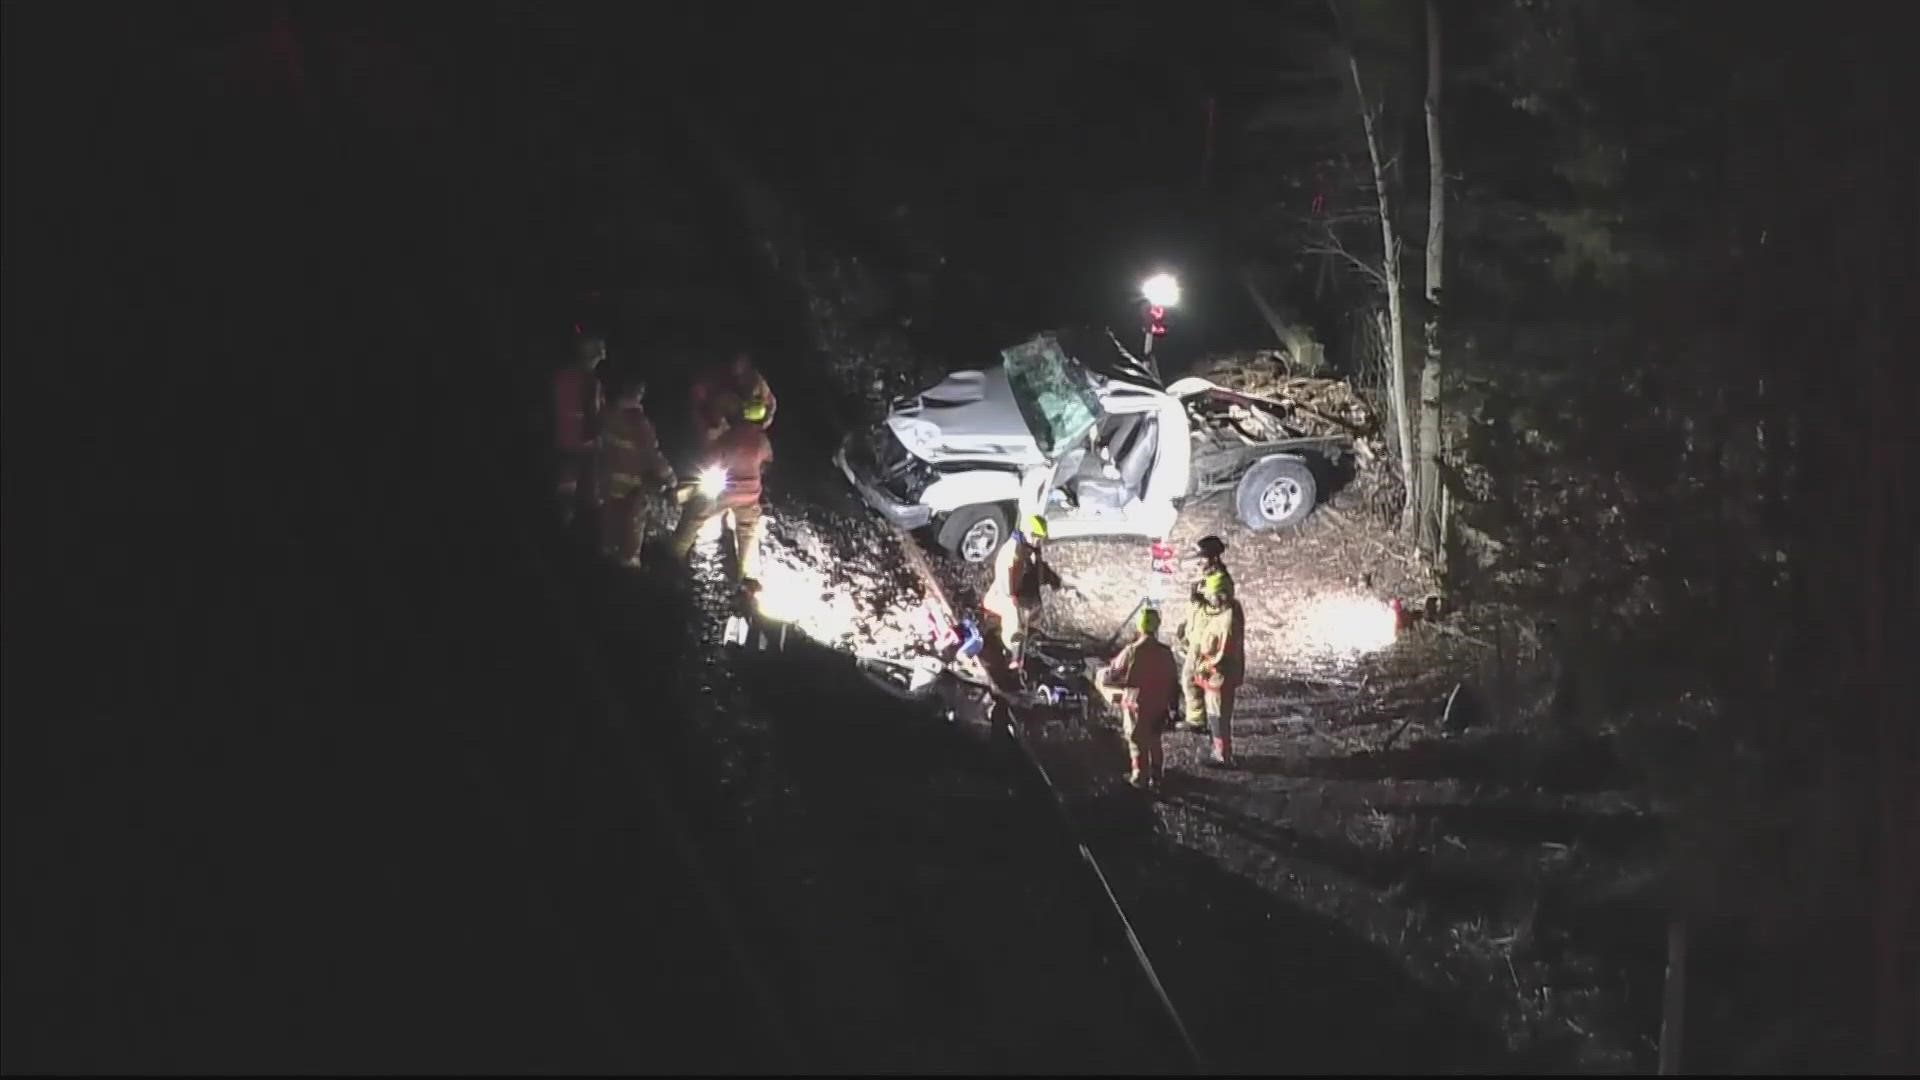 Police say a portion of a roadway in Prince William County was temporarily closed following a crash involving a train and a truck Monday night.